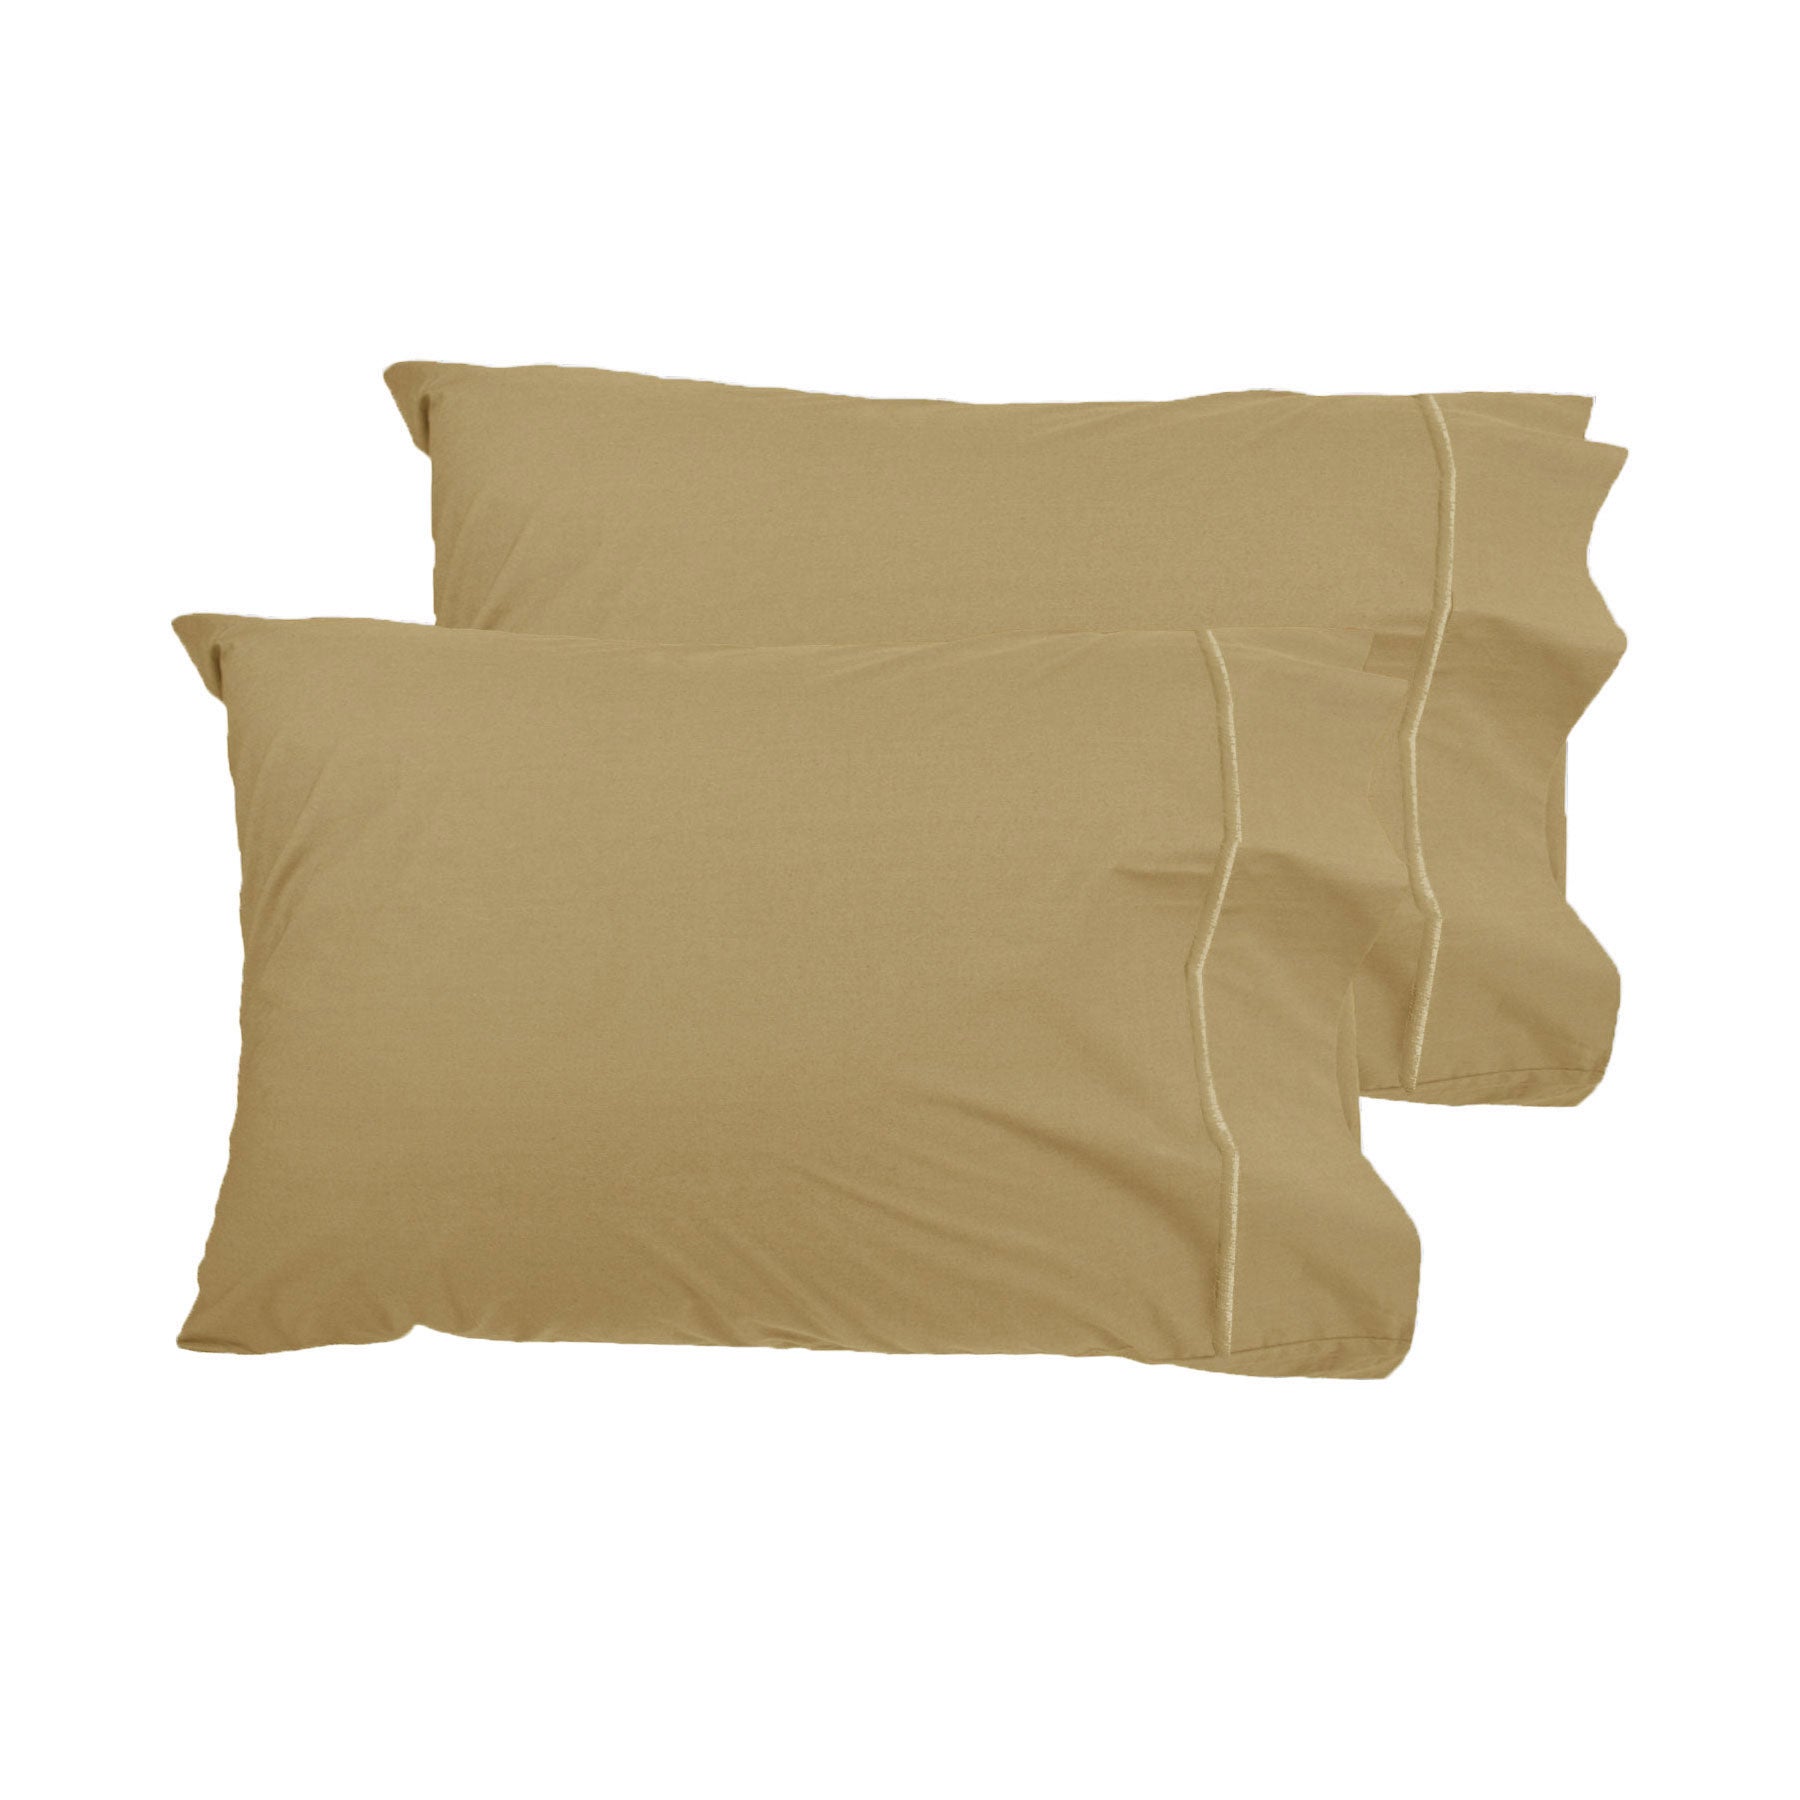 Pair of Queen Sized Pillowcases - Royal Gold